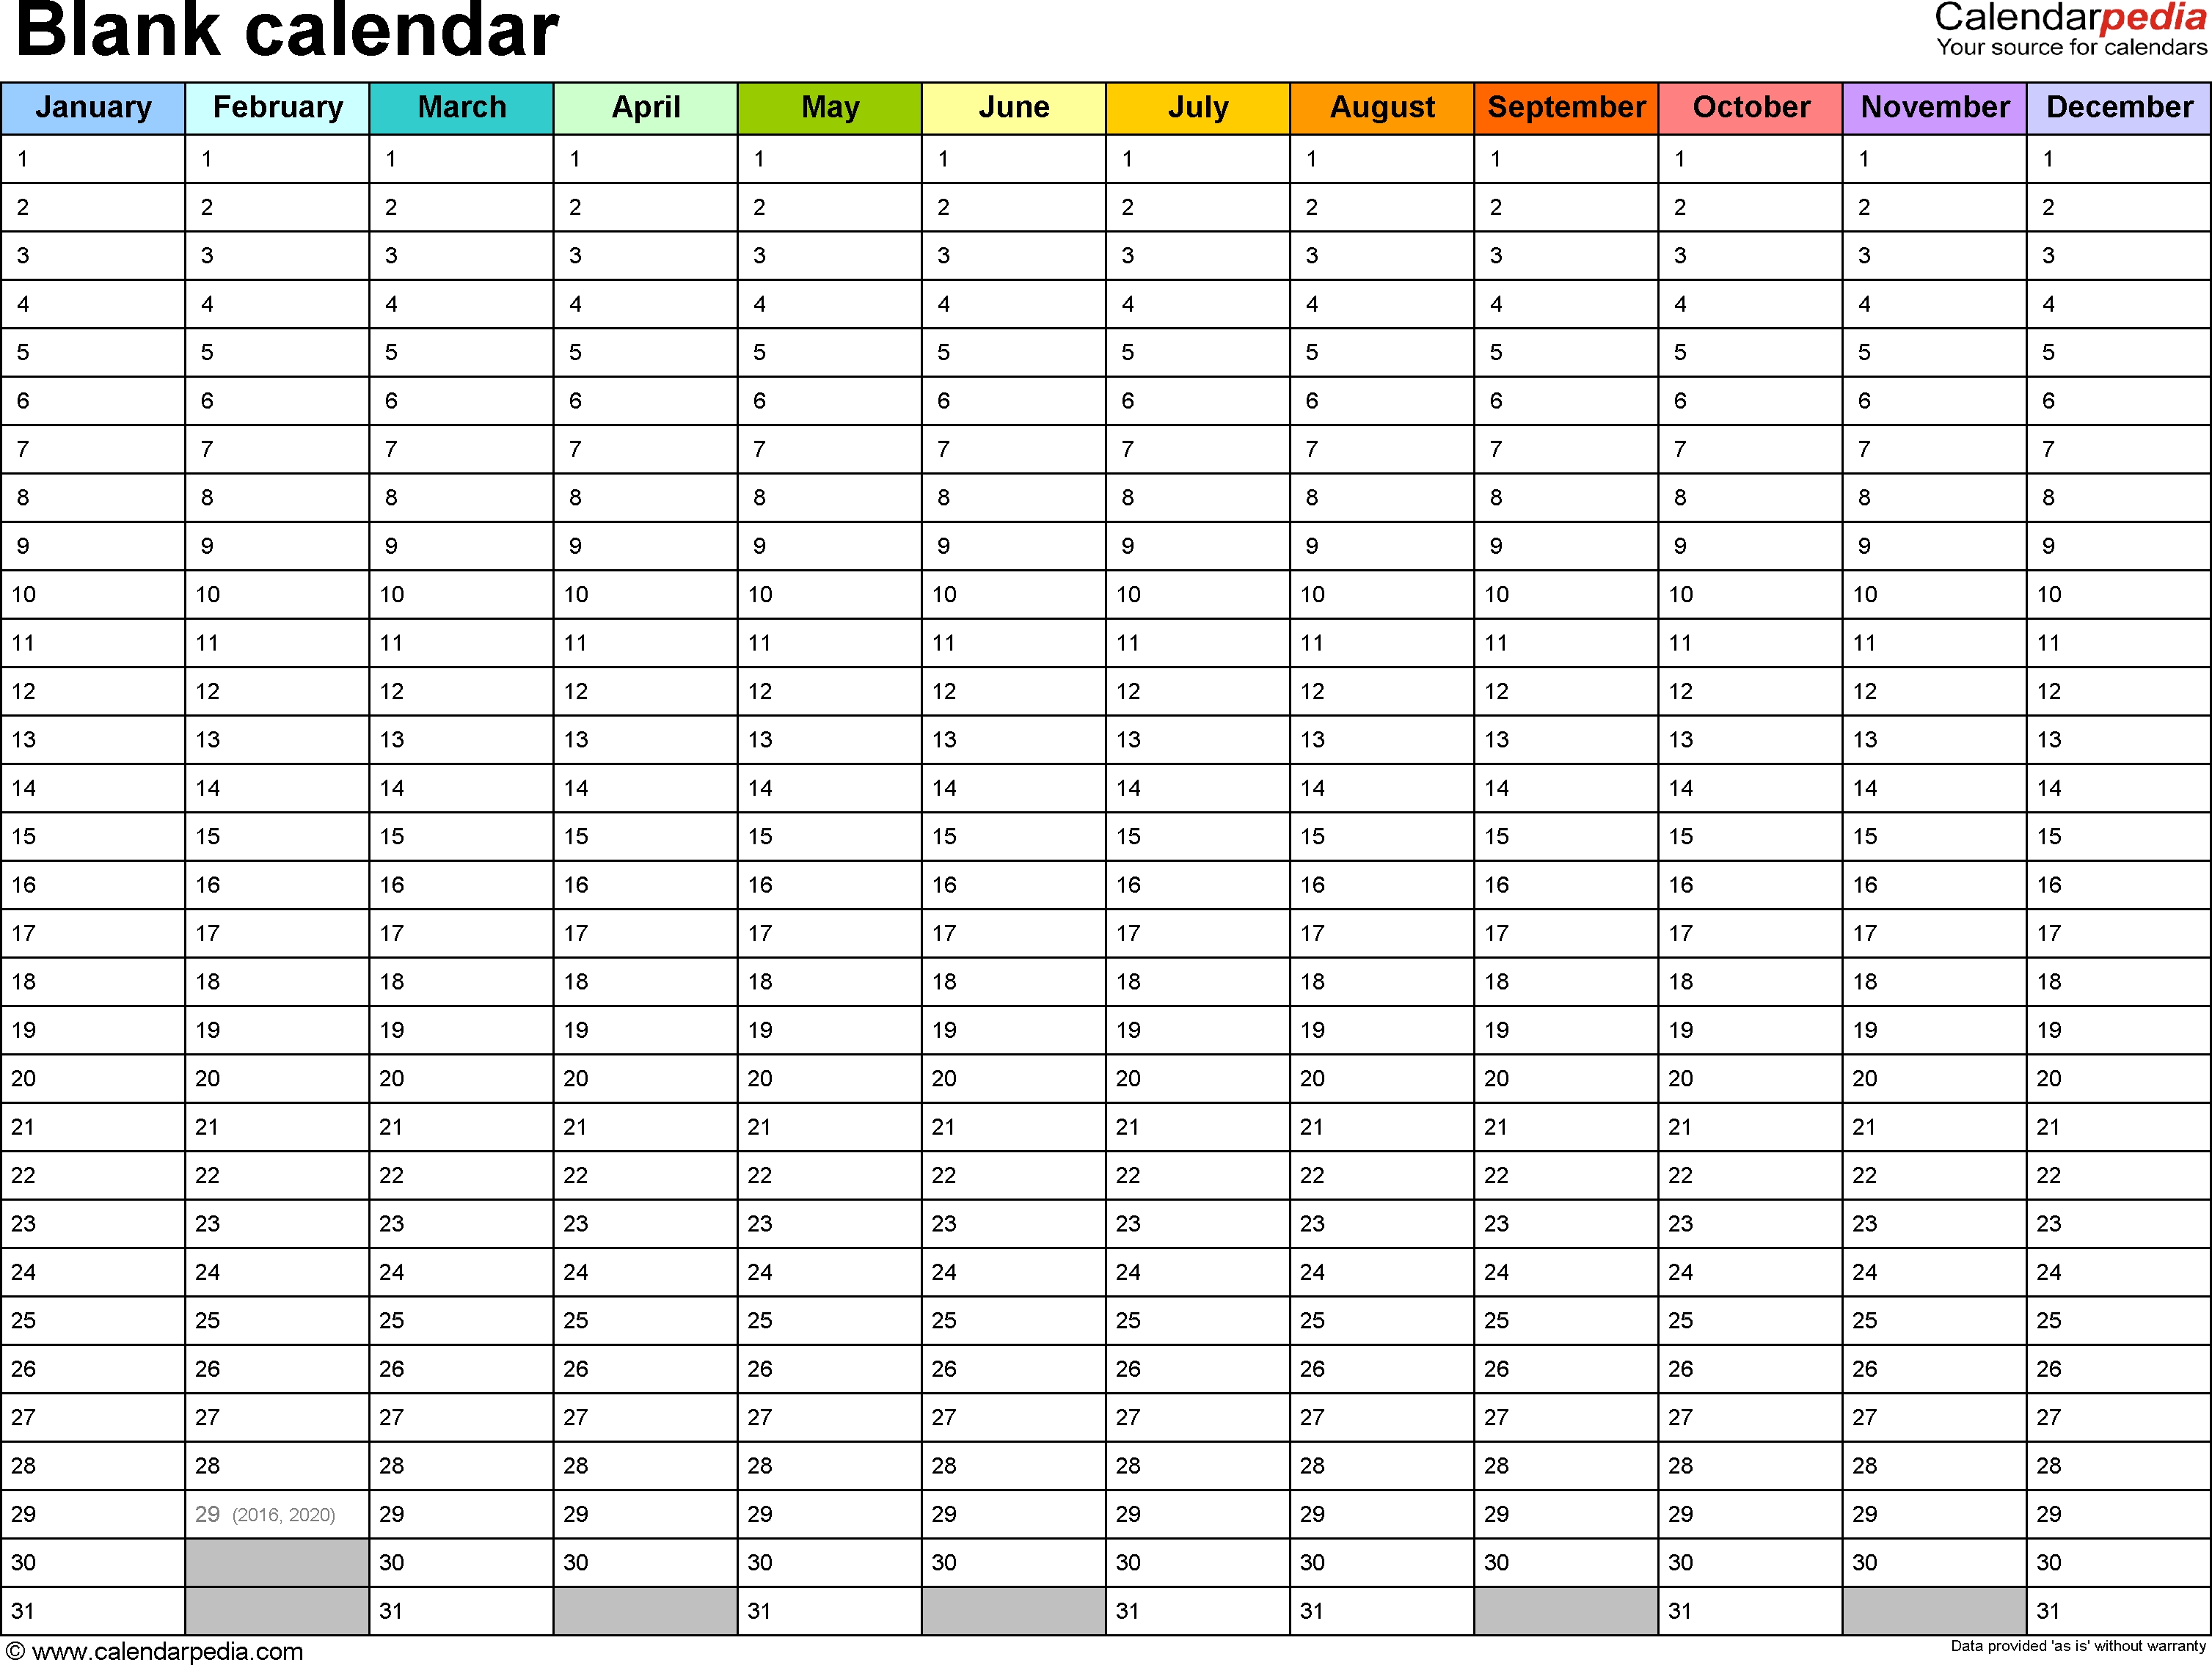 Blank Calendar - 9 Free Printable Microsoft Word Templates within Page A Day Calendar Template